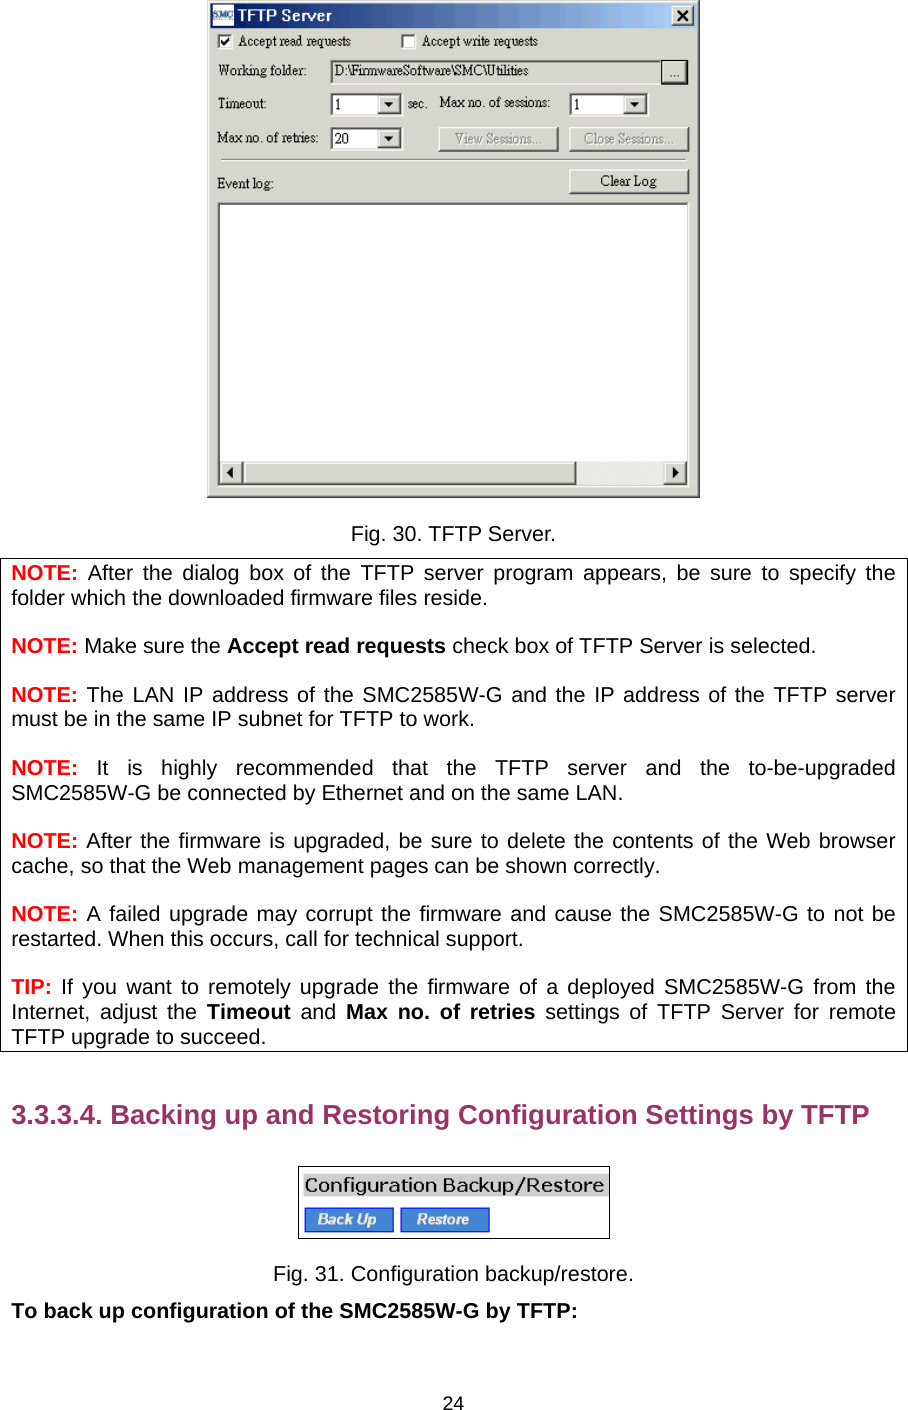   24 Fig. 30. TFTP Server. NOTE: After the dialog box of the TFTP server program appears, be sure to specify the folder which the downloaded firmware files reside. NOTE: Make sure the Accept read requests check box of TFTP Server is selected. NOTE: The LAN IP address of the SMC2585W-G and the IP address of the TFTP server must be in the same IP subnet for TFTP to work. NOTE: It is highly recommended that the TFTP server and the to-be-upgraded SMC2585W-G be connected by Ethernet and on the same LAN. NOTE: After the firmware is upgraded, be sure to delete the contents of the Web browser cache, so that the Web management pages can be shown correctly. NOTE: A failed upgrade may corrupt the firmware and cause the SMC2585W-G to not be restarted. When this occurs, call for technical support. TIP: If you want to remotely upgrade the firmware of a deployed SMC2585W-G from the Internet, adjust the Timeout and Max no. of retries settings of TFTP Server for remote TFTP upgrade to succeed. 3.3.3.4. Backing up and Restoring Configuration Settings by TFTP  Fig. 31. Configuration backup/restore. To back up configuration of the SMC2585W-G by TFTP: 